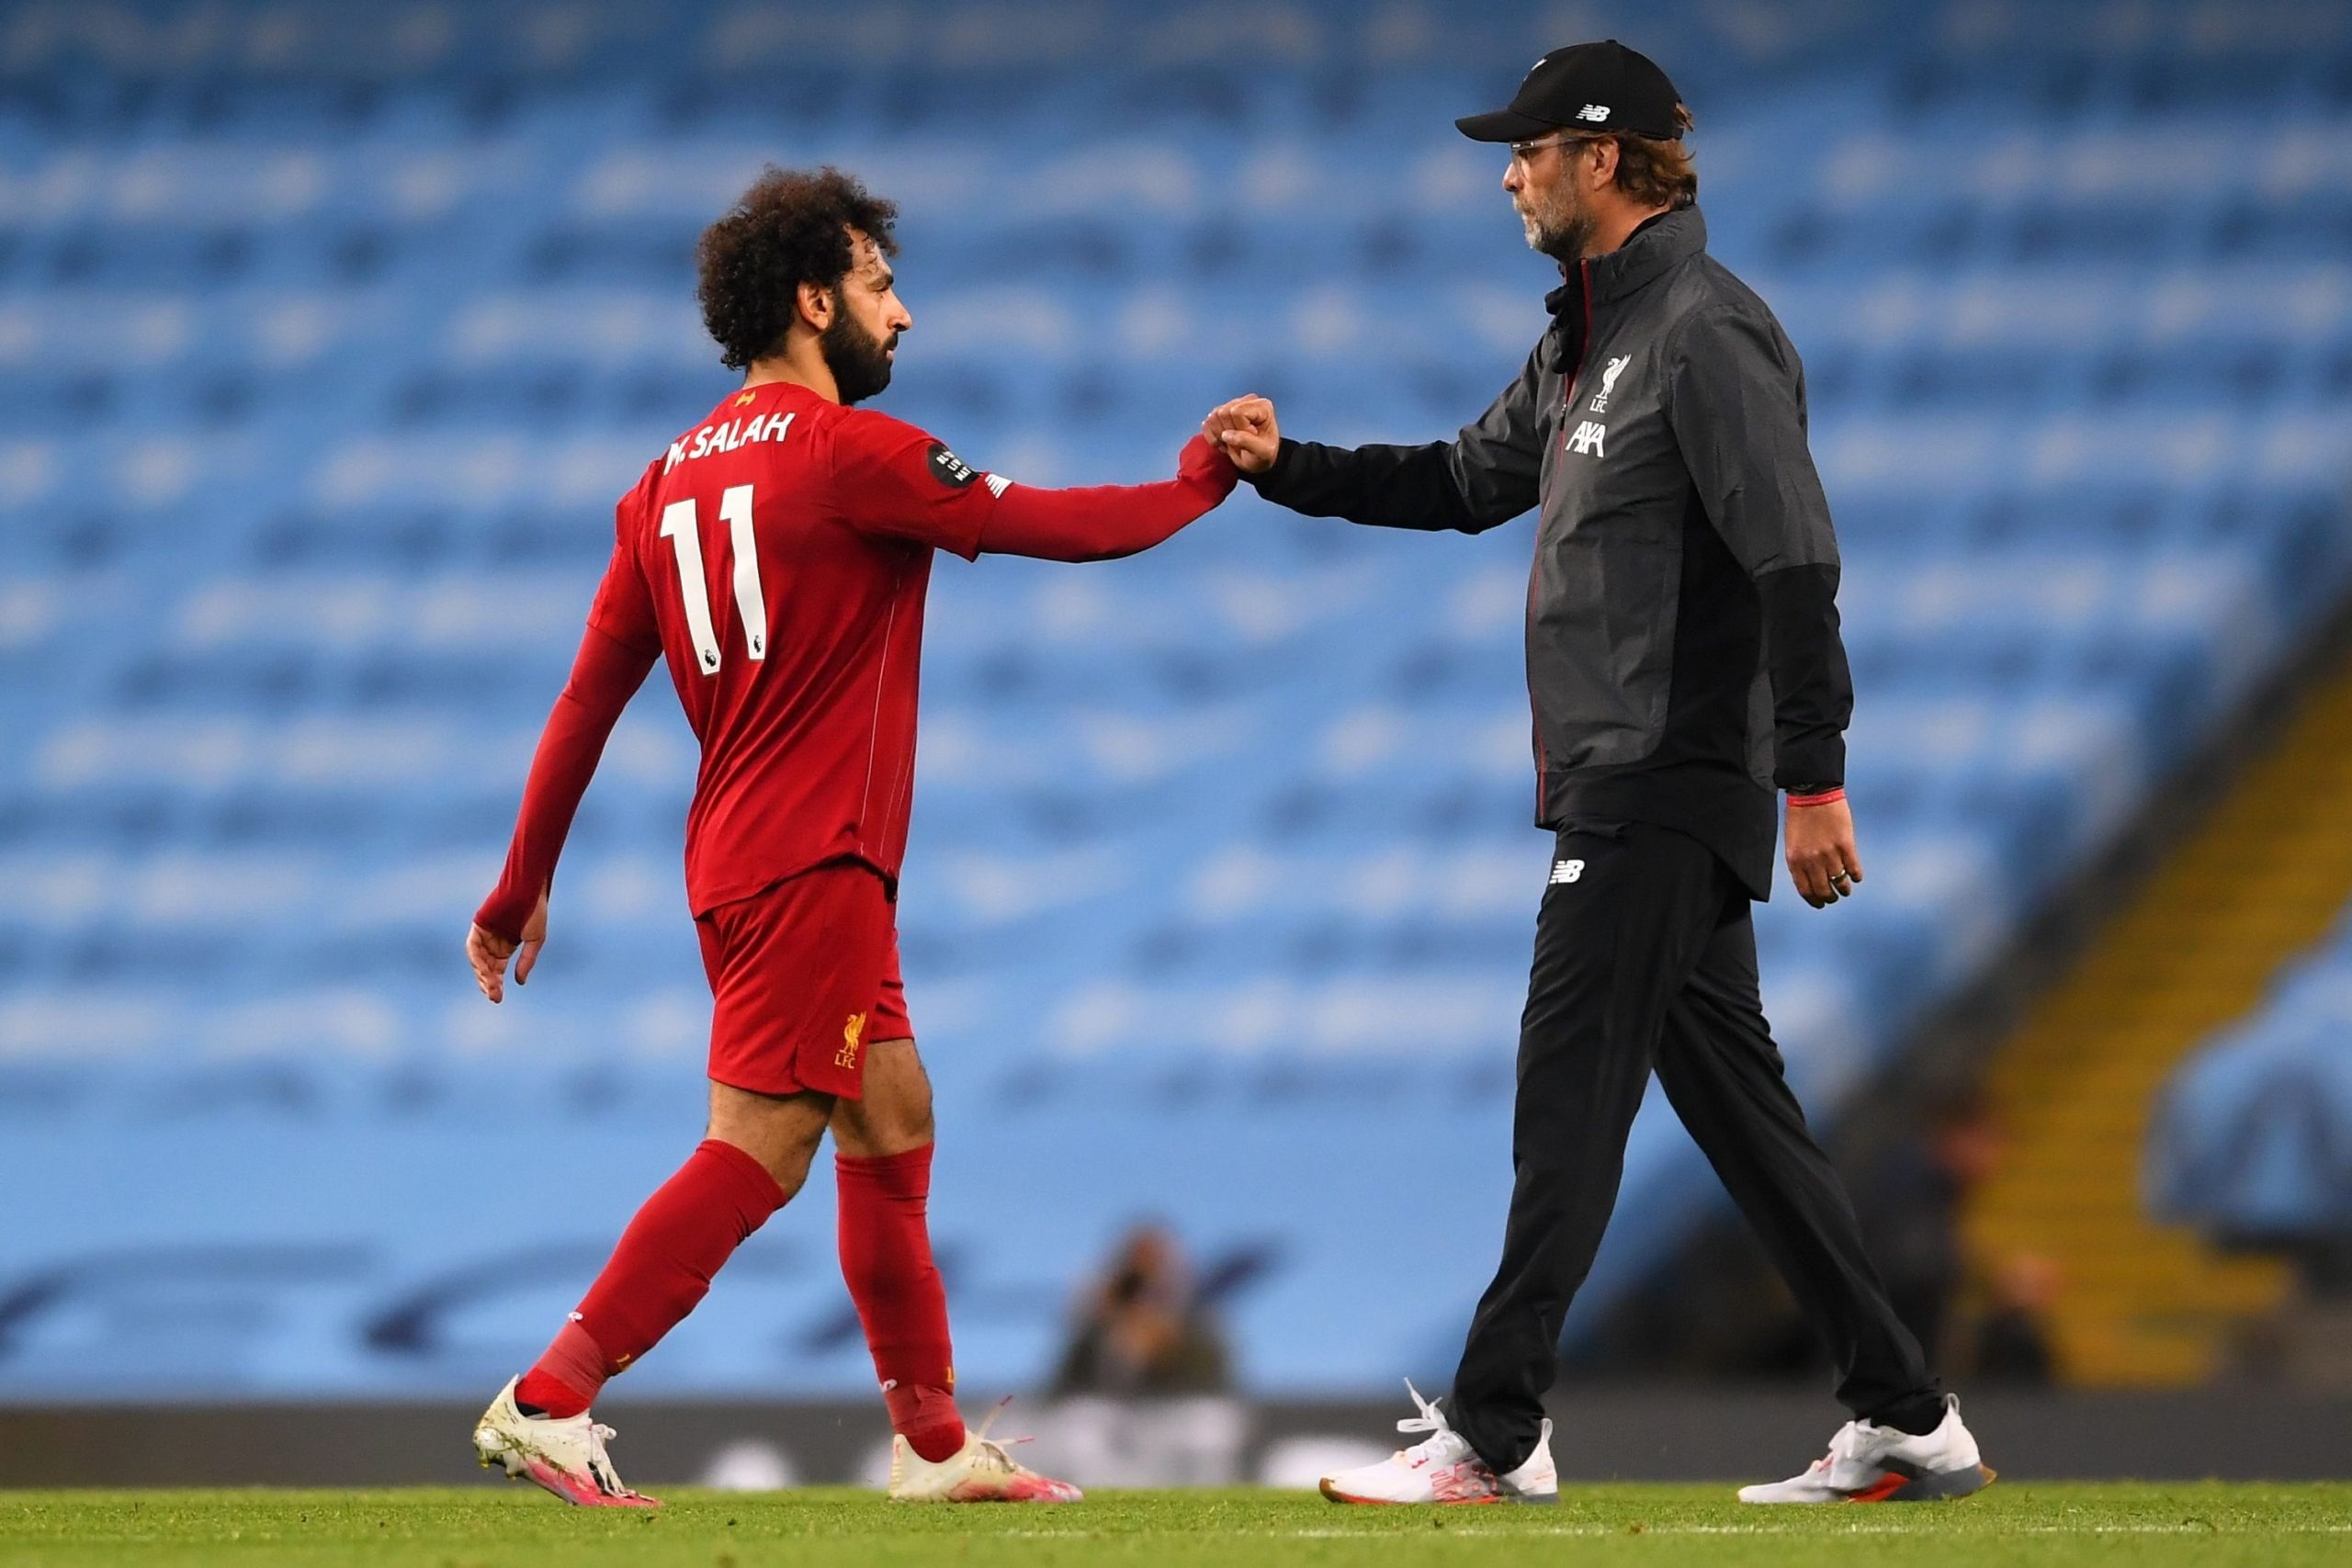 The Defender That Liverpool Should Target In The Winter: Klopp and Salah